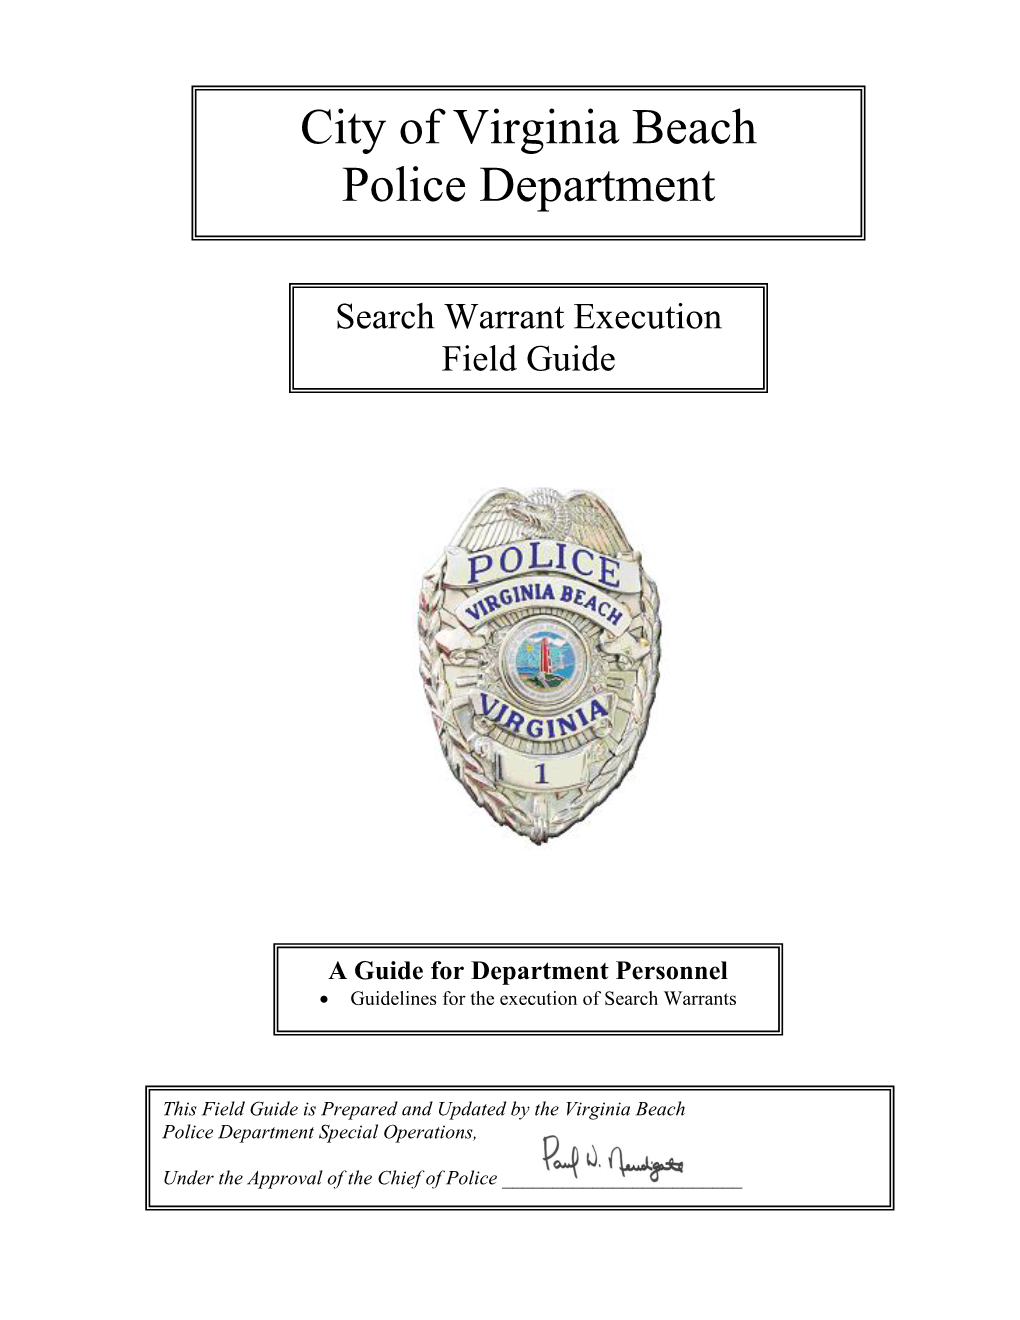 Search Warrant Execution Field Guide Page 2 of 7